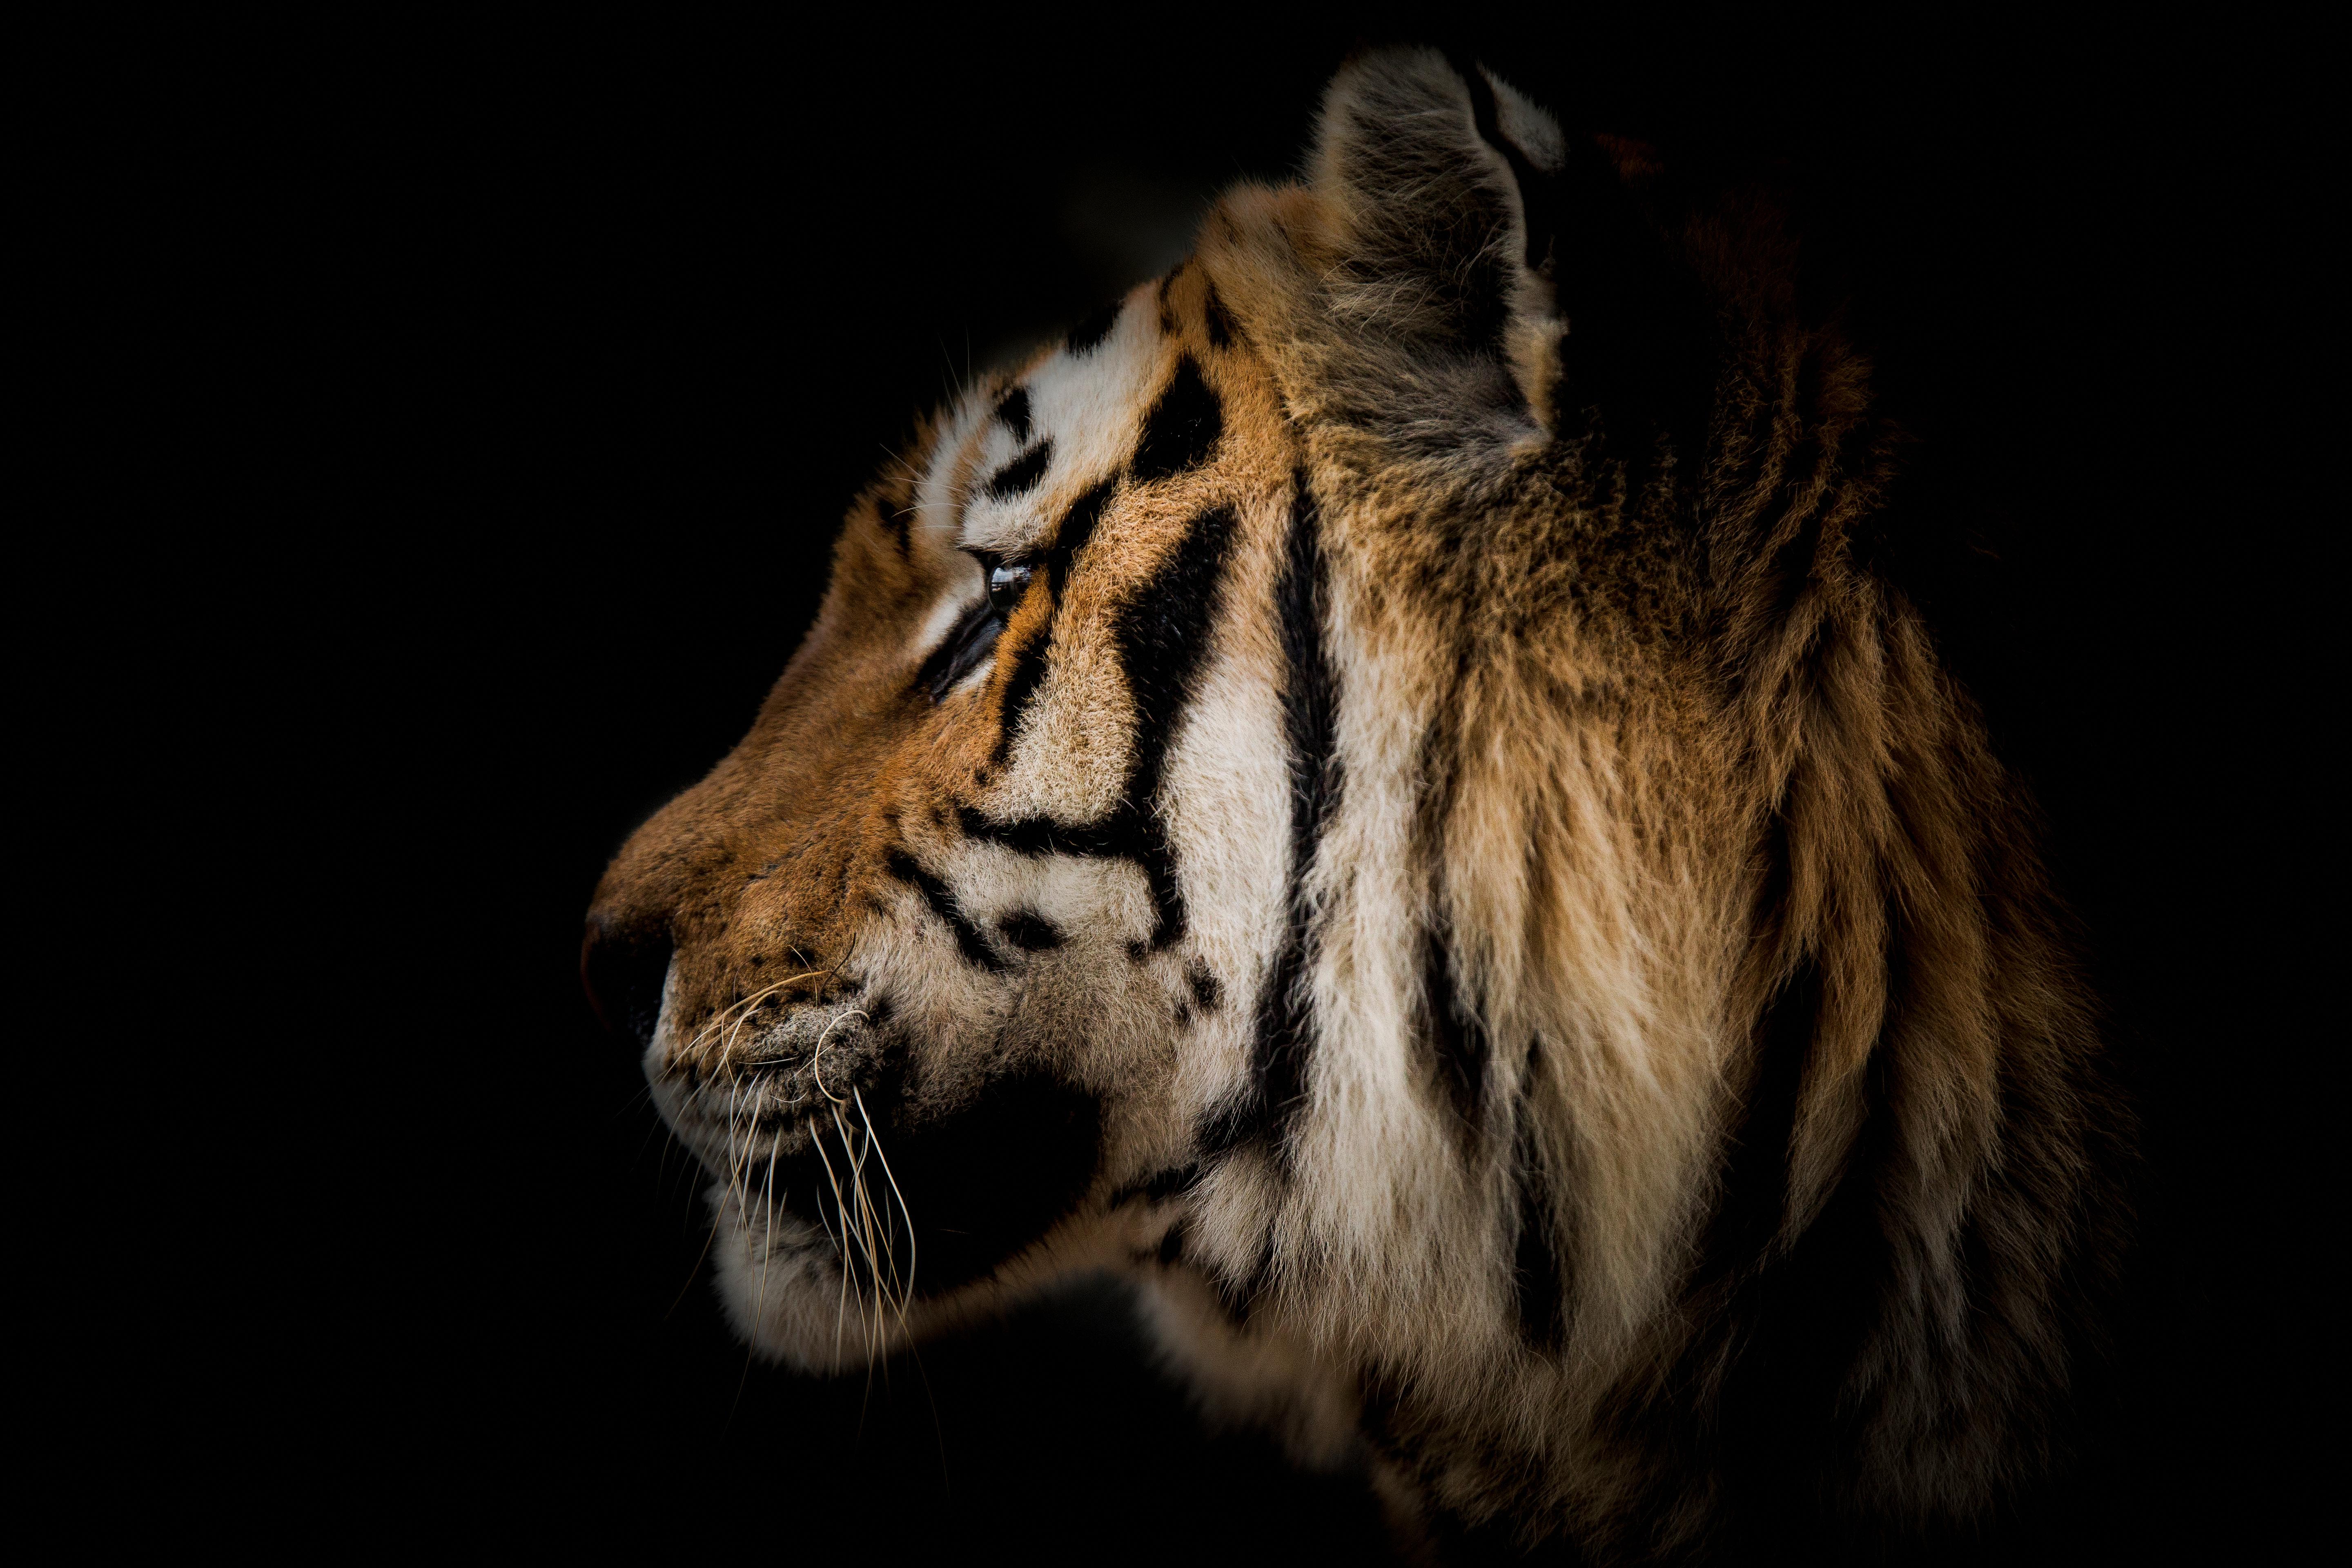 Shane Russeck Black and White Photograph - "Tiger Portrait" - 36x24 Photography Wildlife Art Photograph Poster Print